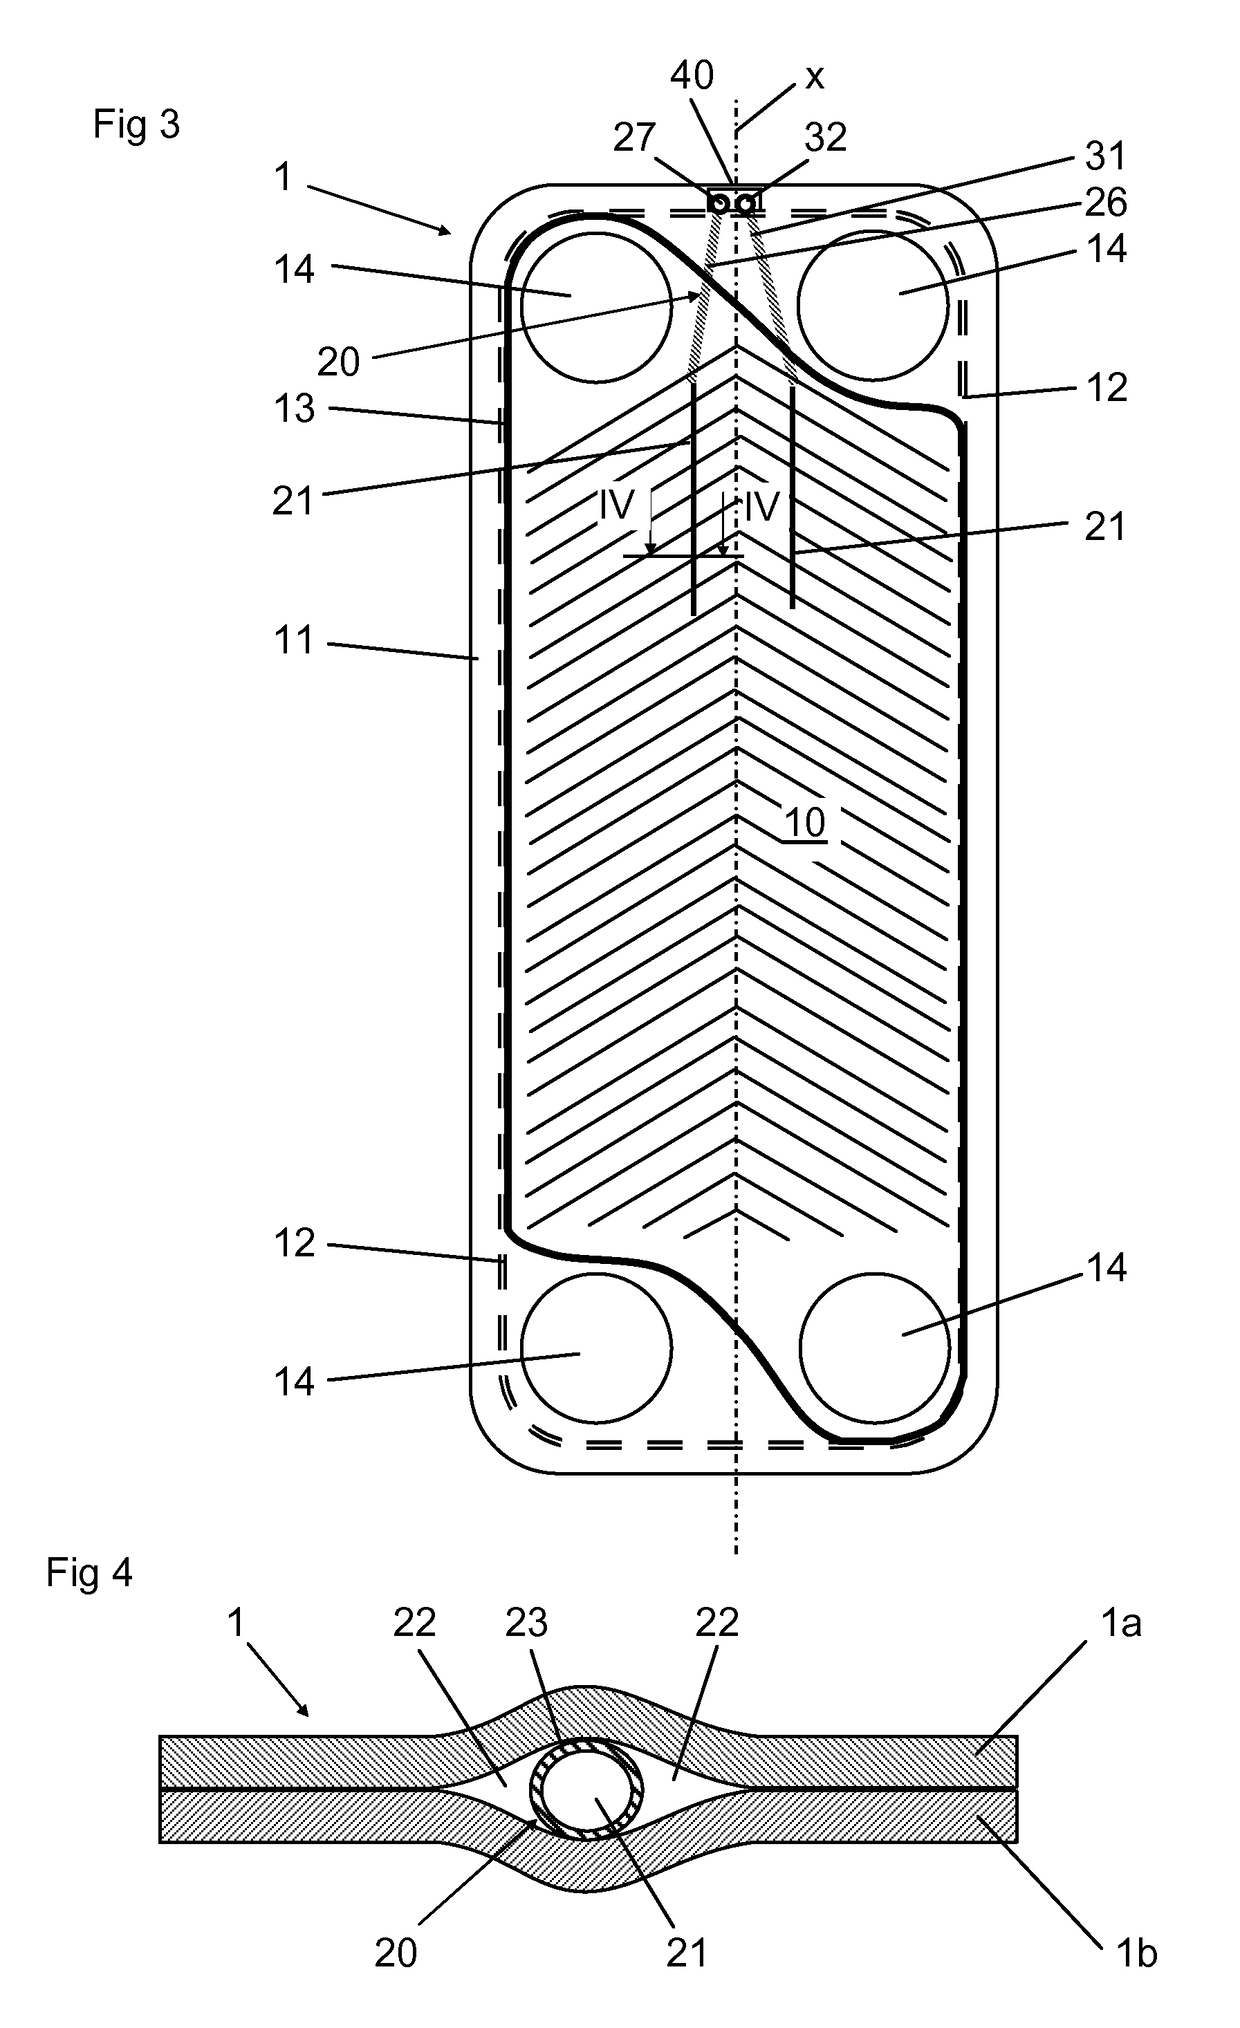 Heat exchanger plate and a plate heat exchanger with insulated sensor internal to heat exchange area